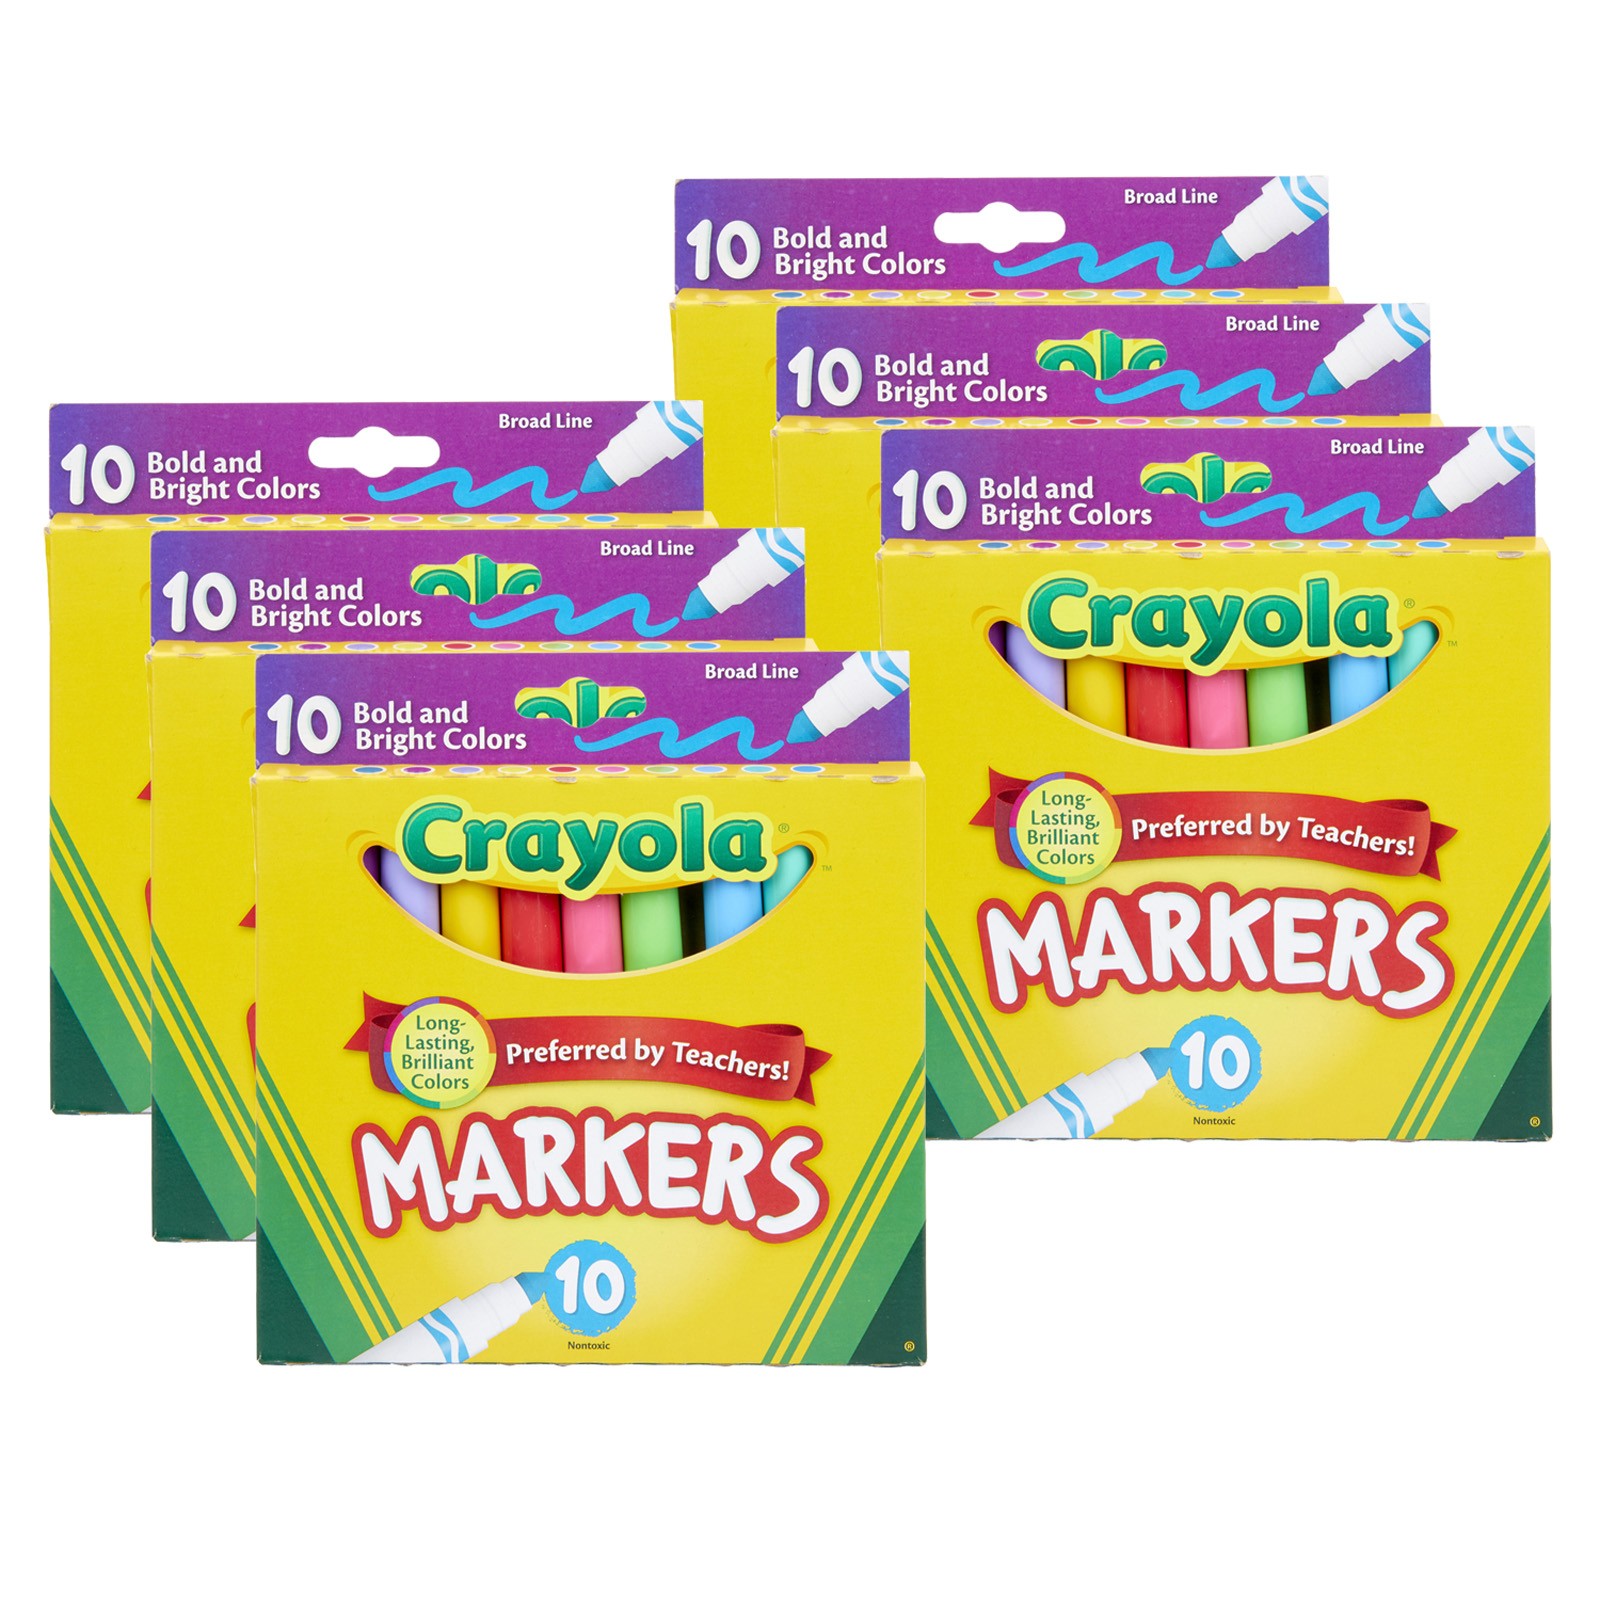 Broad Line Markers, Bold & Bright Colors, 10 Per Pack, 6 Packs